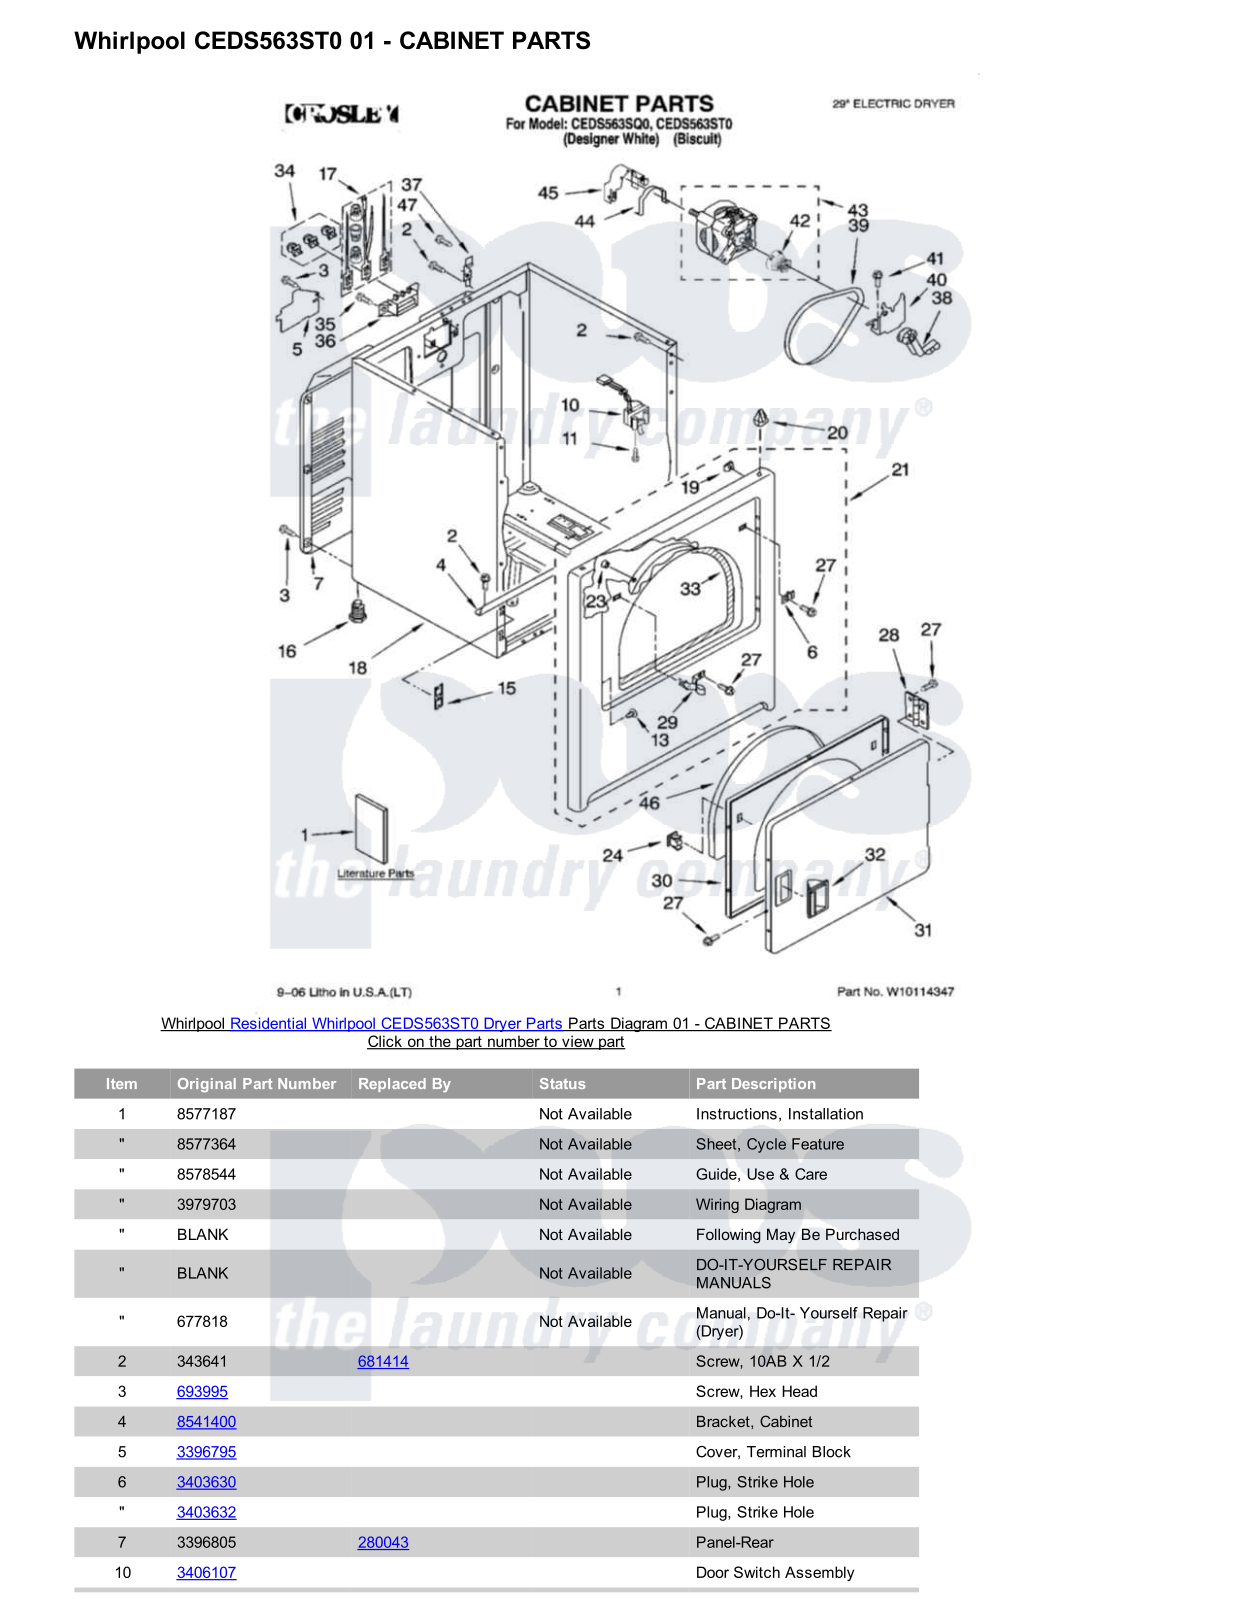 Whirlpool CEDS563ST0 Parts Diagram